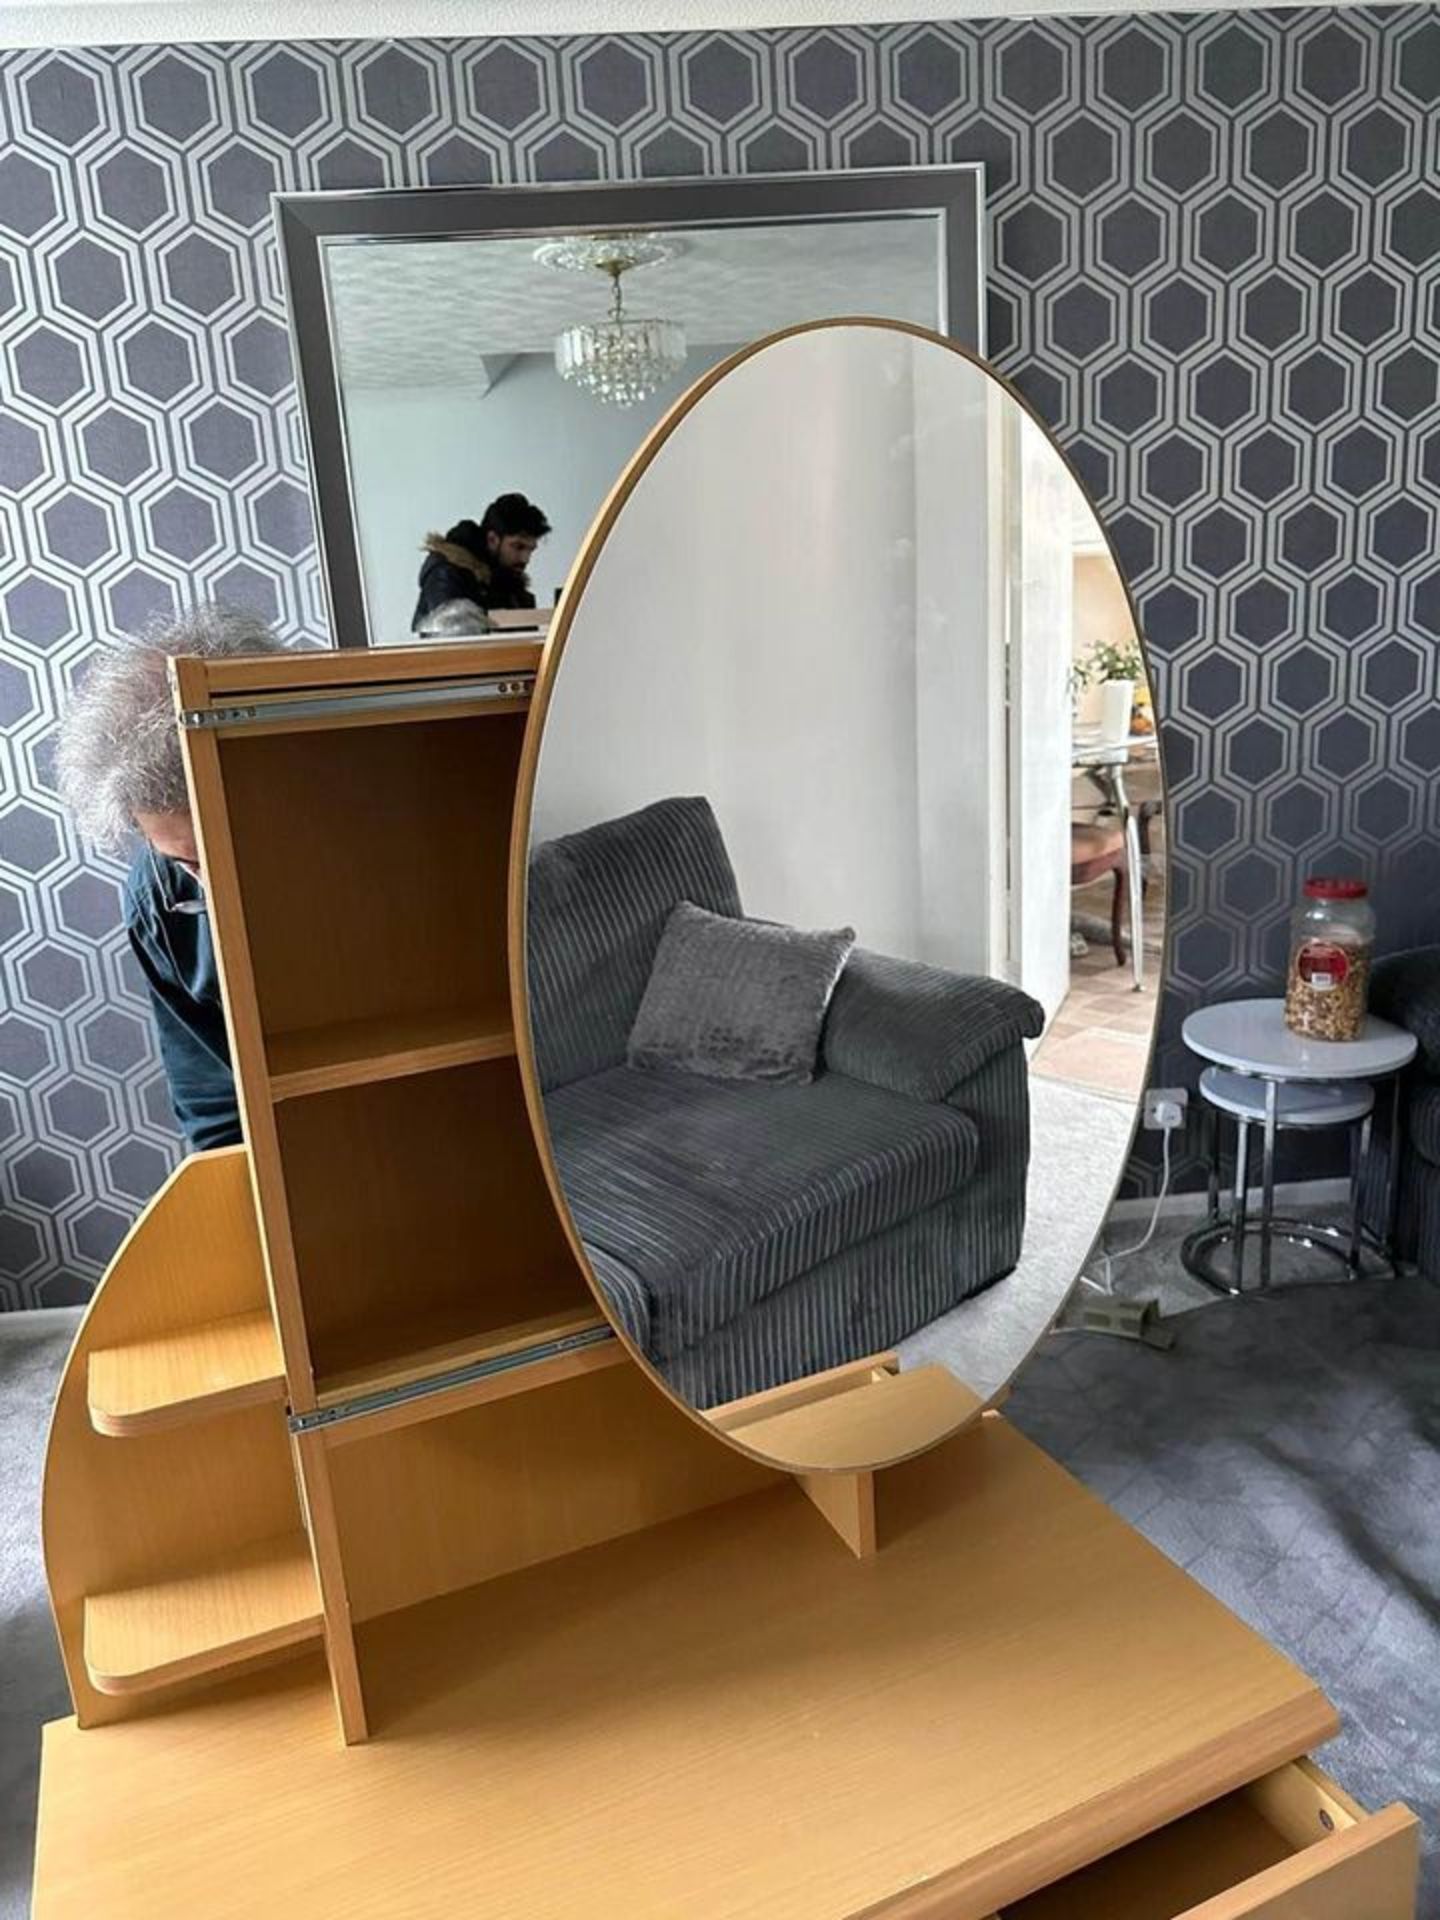 DRESSING TABLE WITH STOOL AND MIRROR BRAND NEW BOXED ITEM - Image 6 of 7